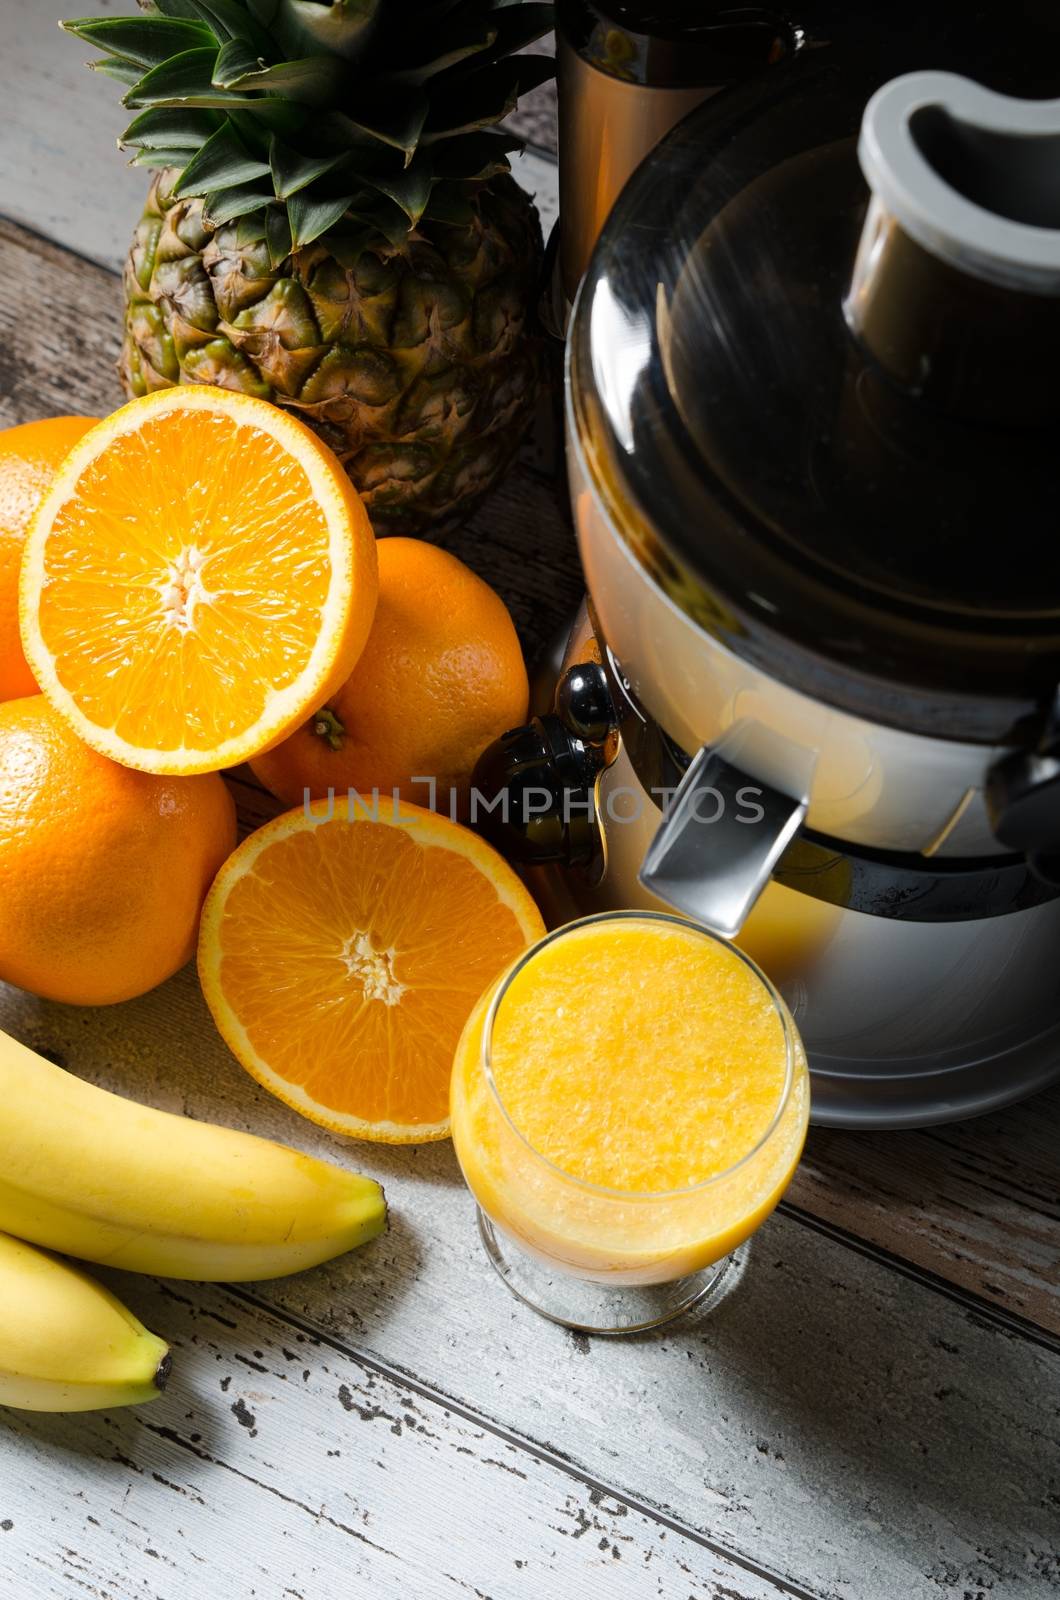 Fresh juice and juicer. Photo on wooden background with lot of fruits